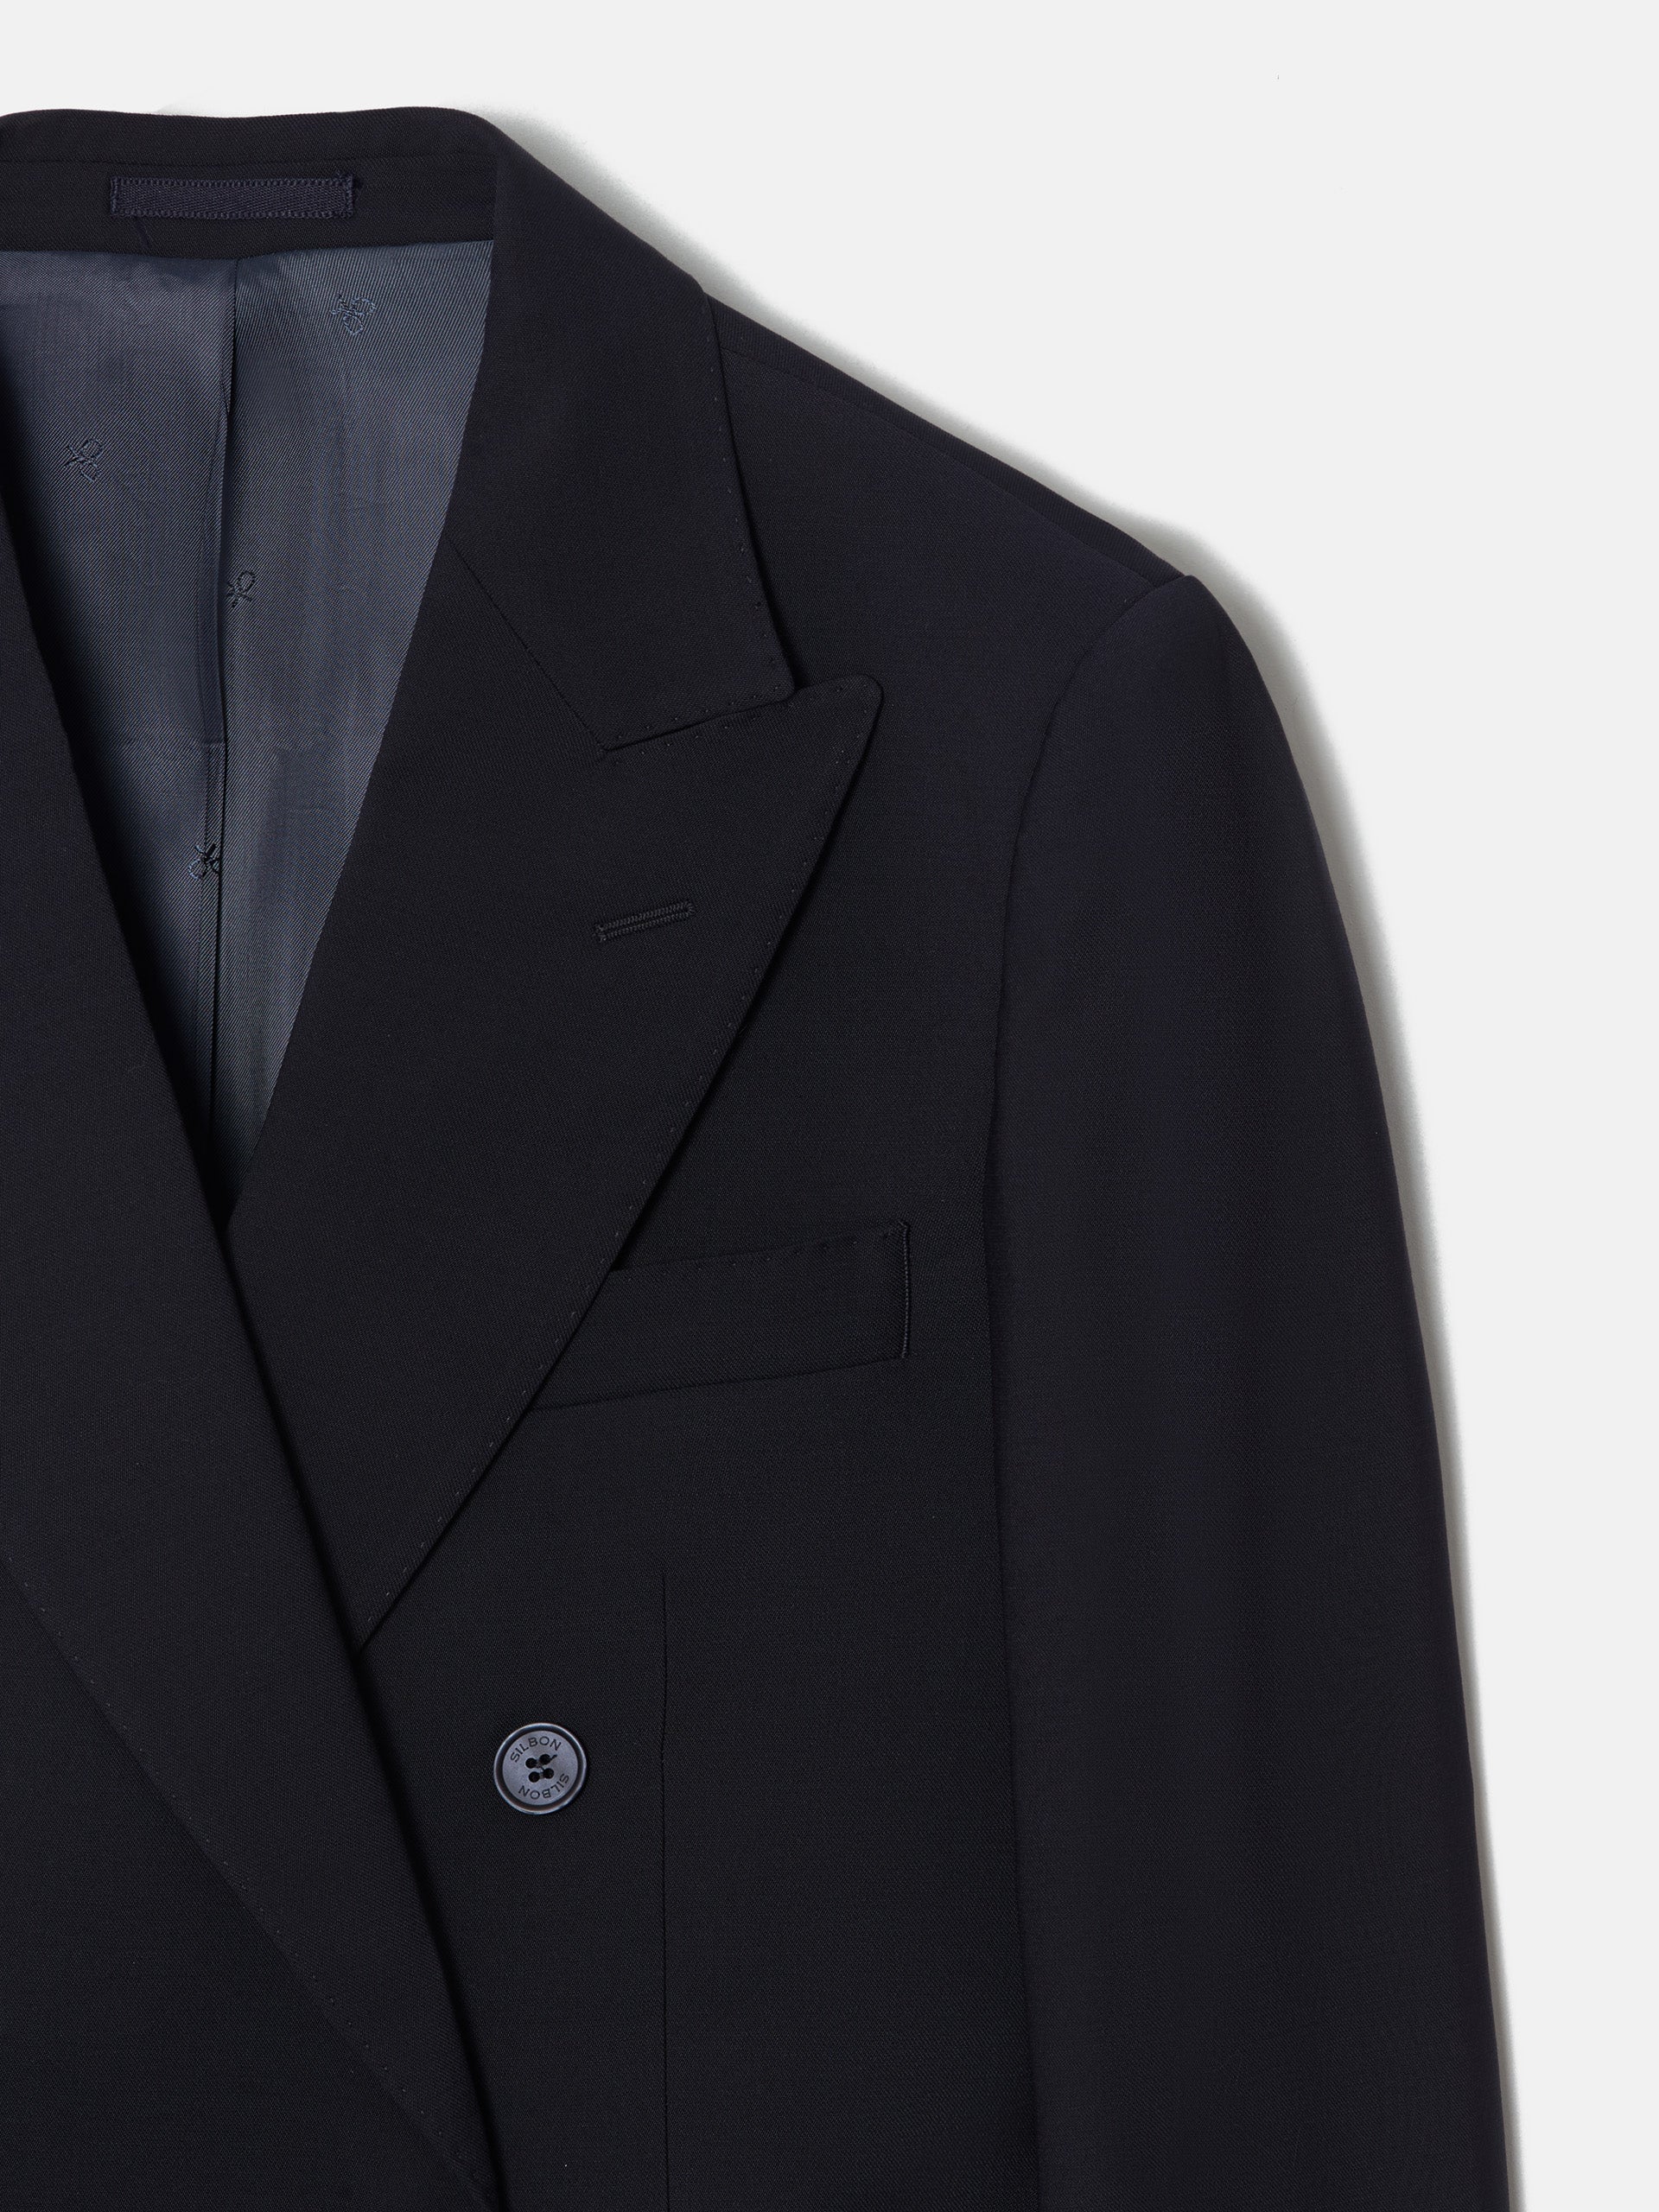 Navy blue stretch double-breasted suit jacket